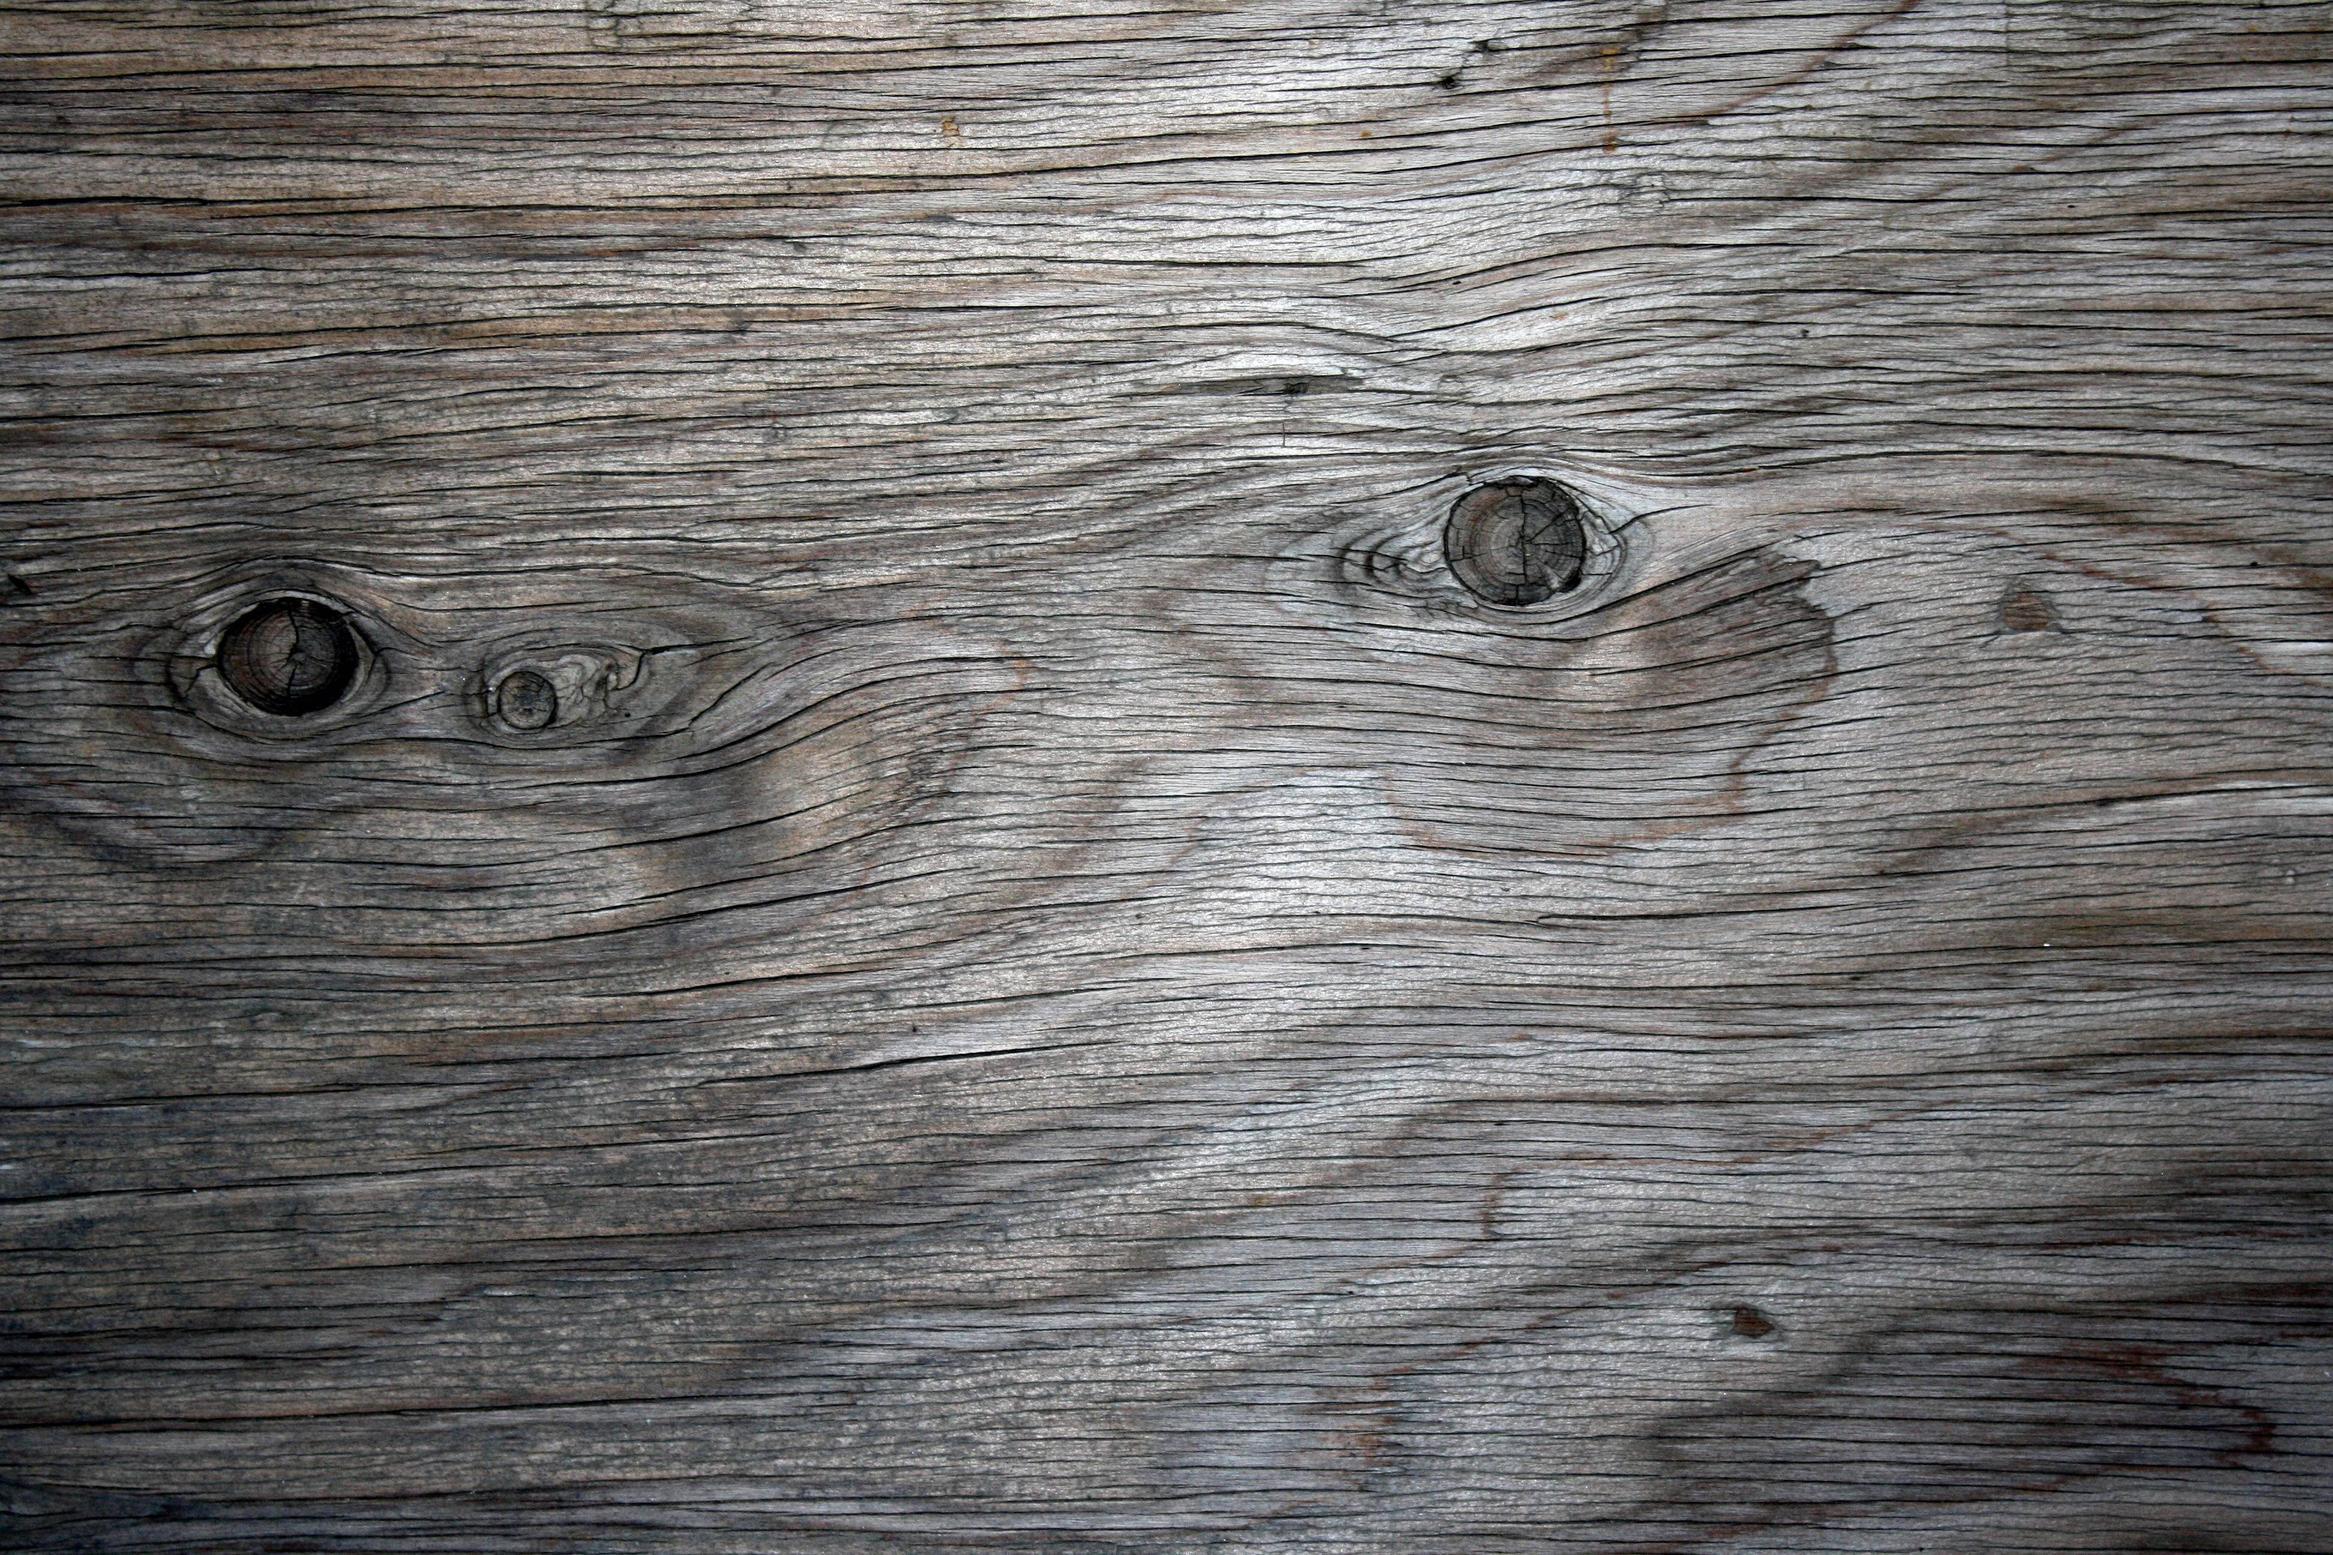 Weathered Wood Grain Texture Picture. Free Photograph. Photo